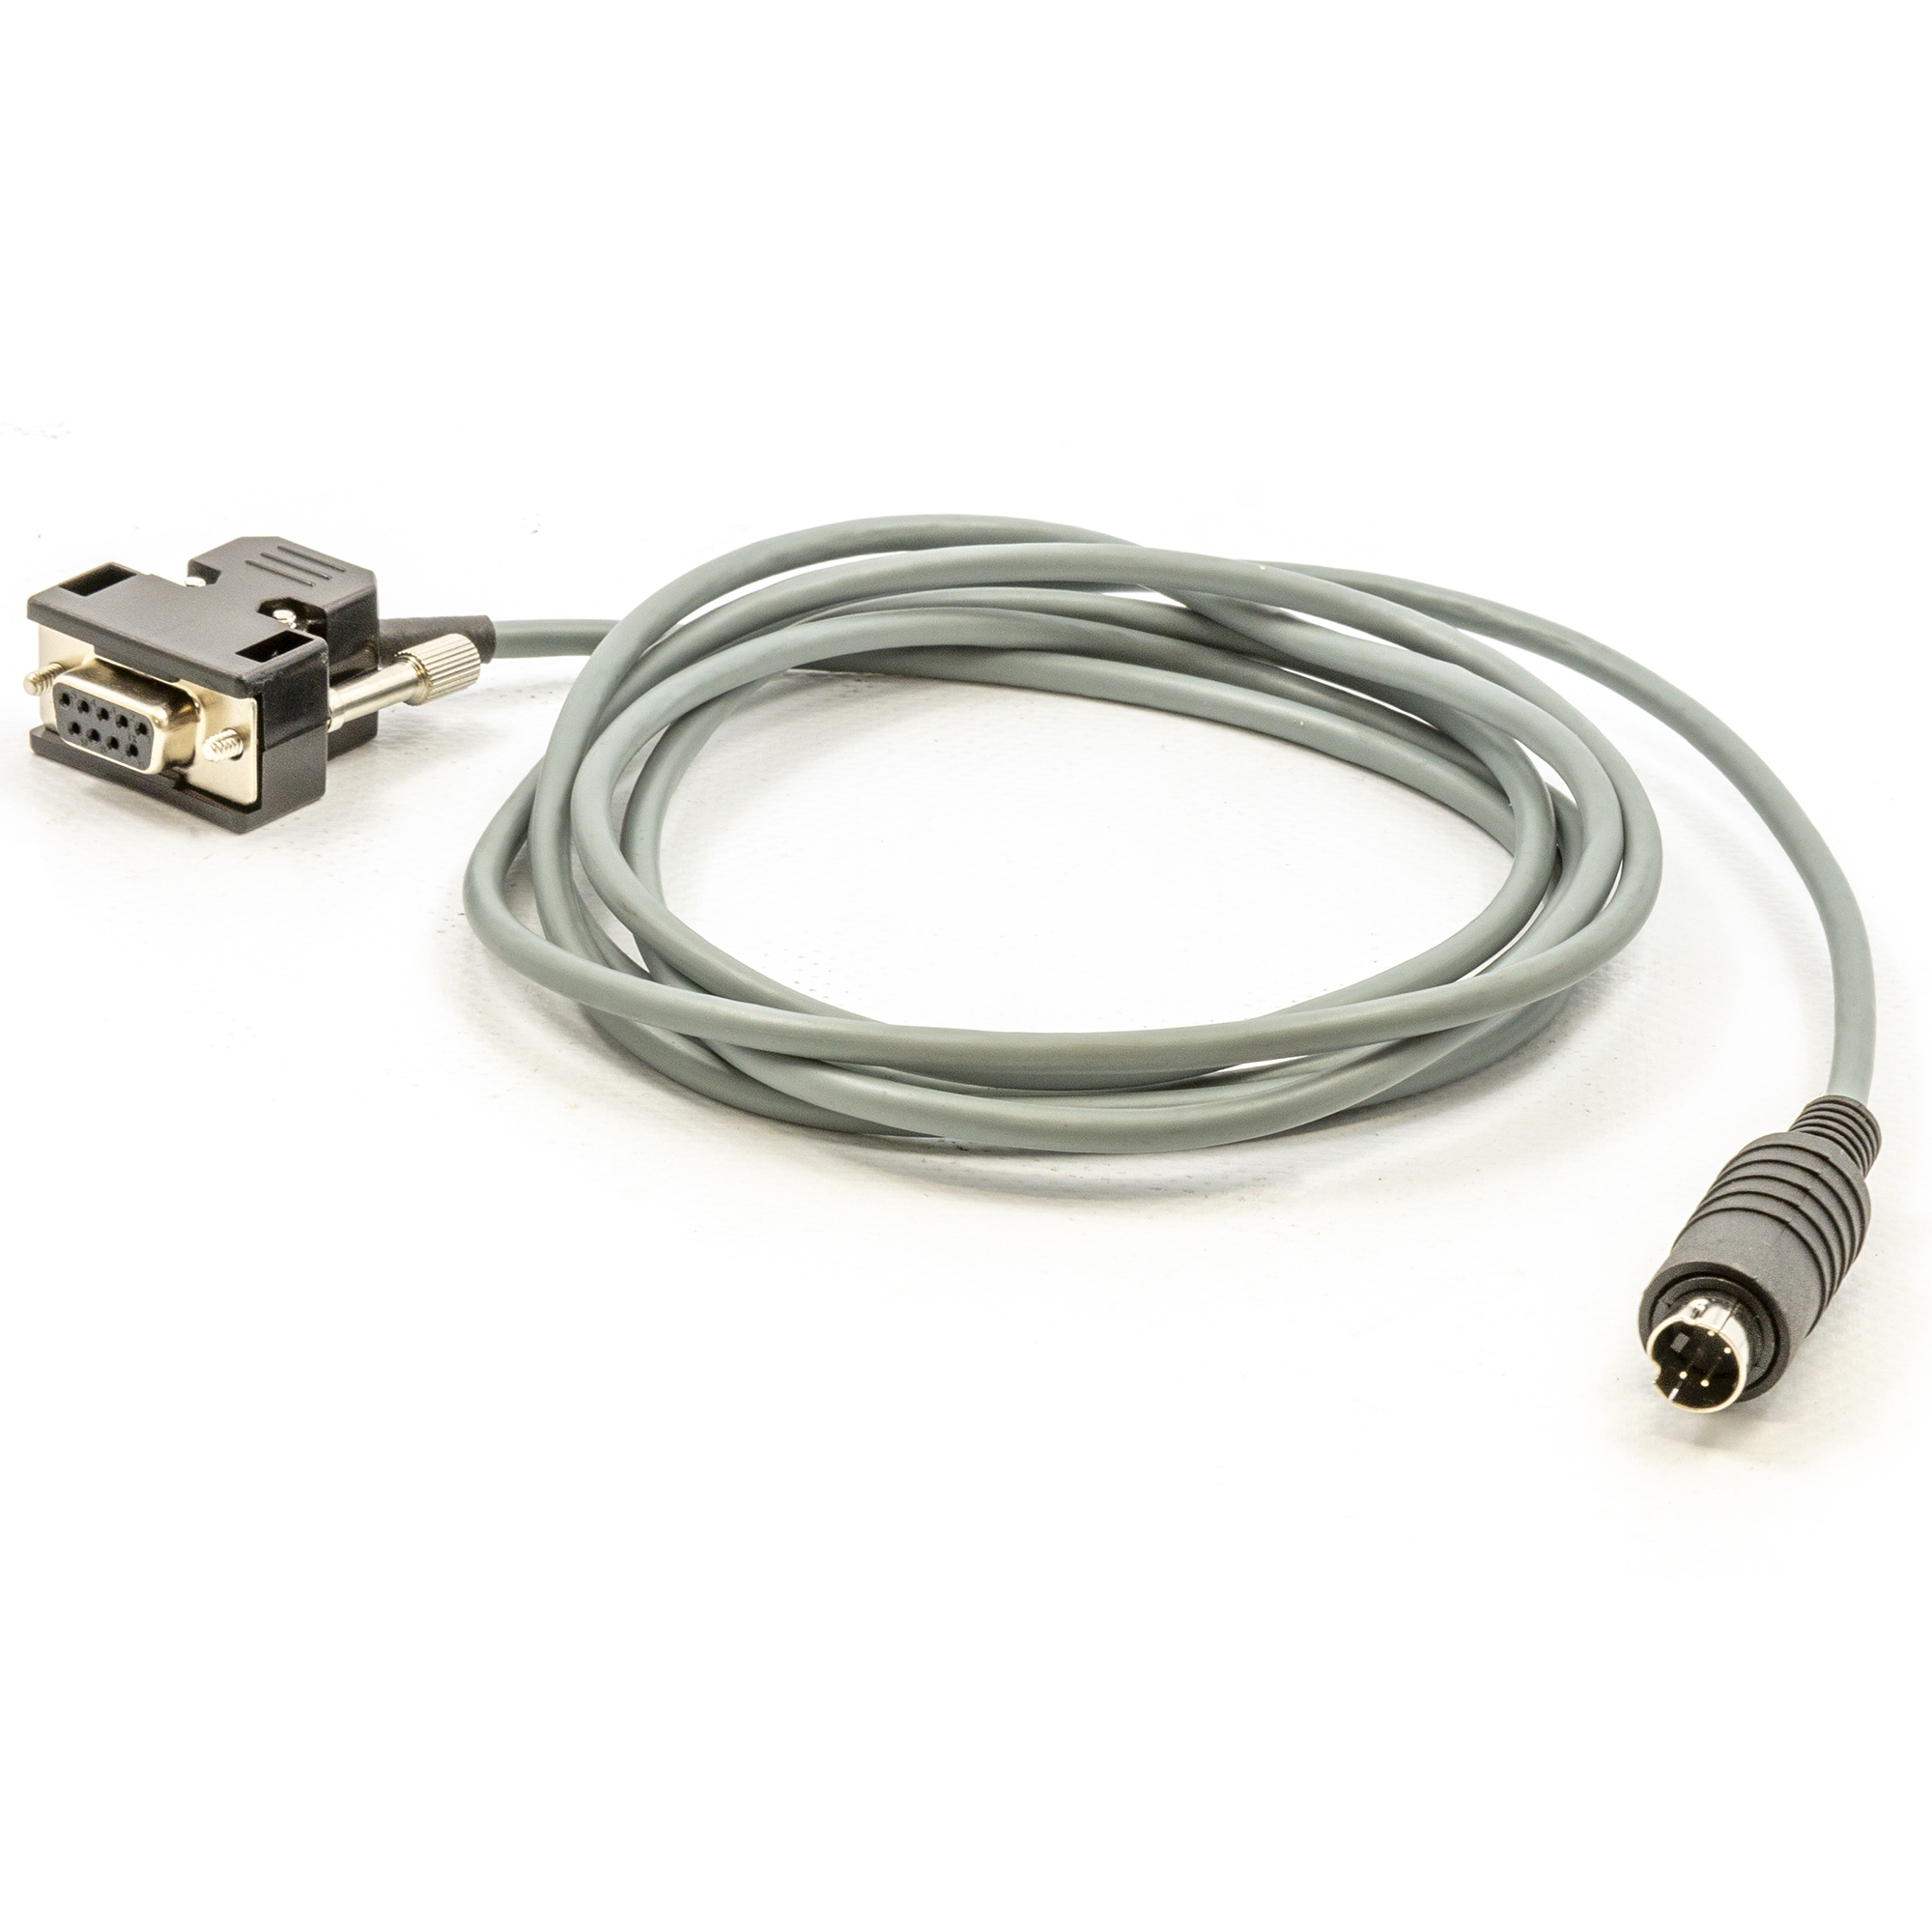 CONT 58-C0215/T2 Serial cable for digital pull-off tester 58-C0215